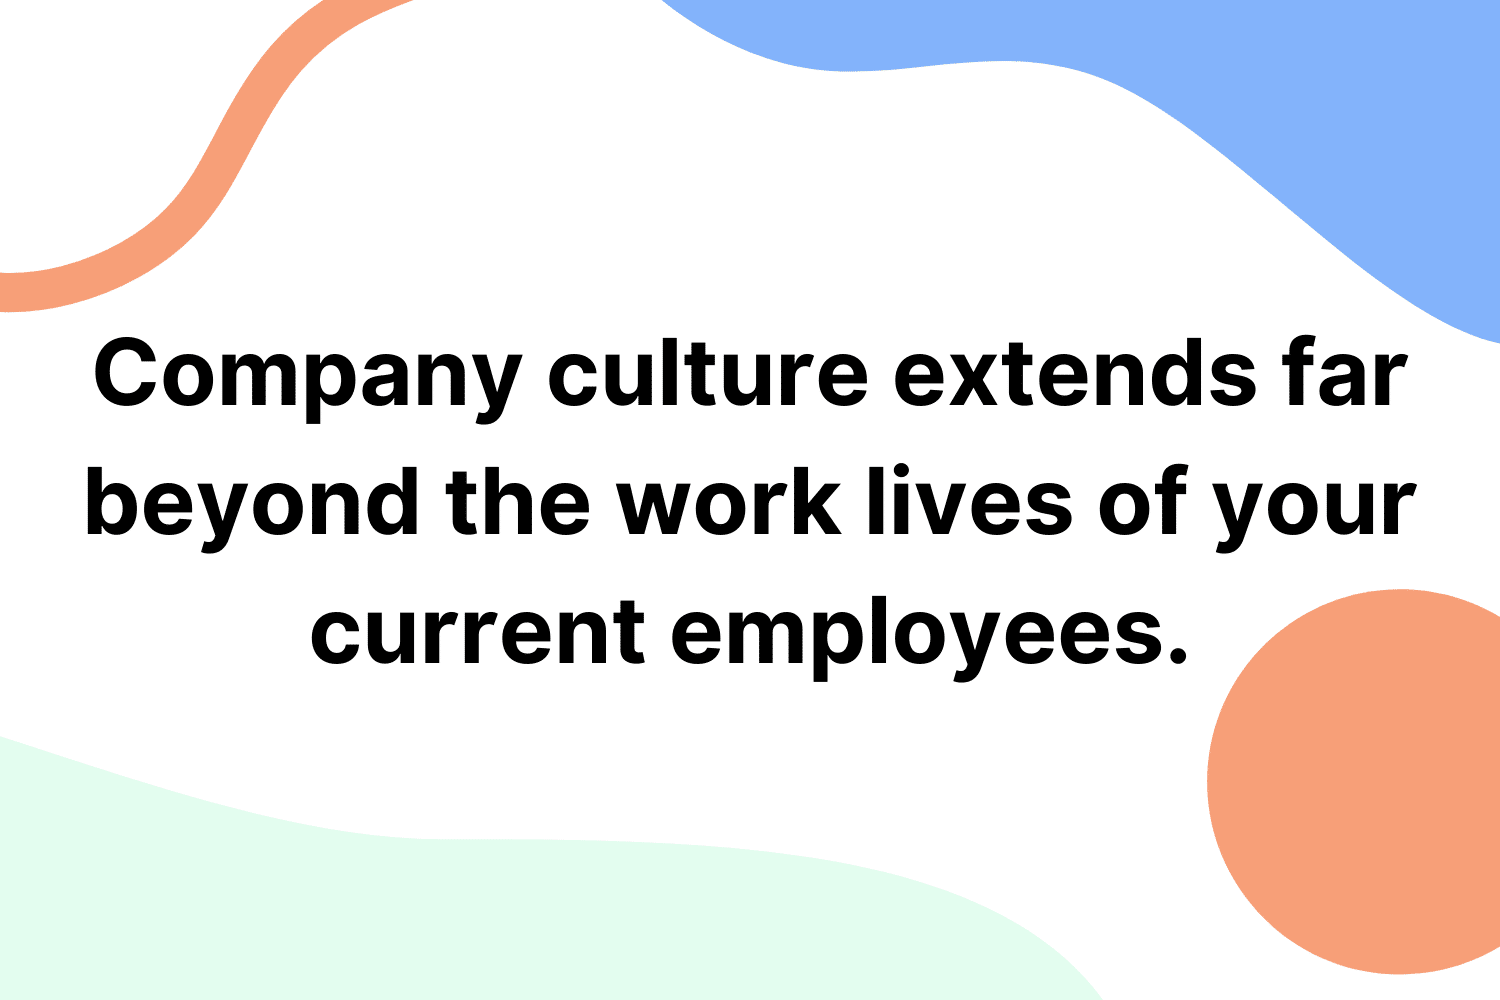 Company culture extends far beyond the work lives of your current employees